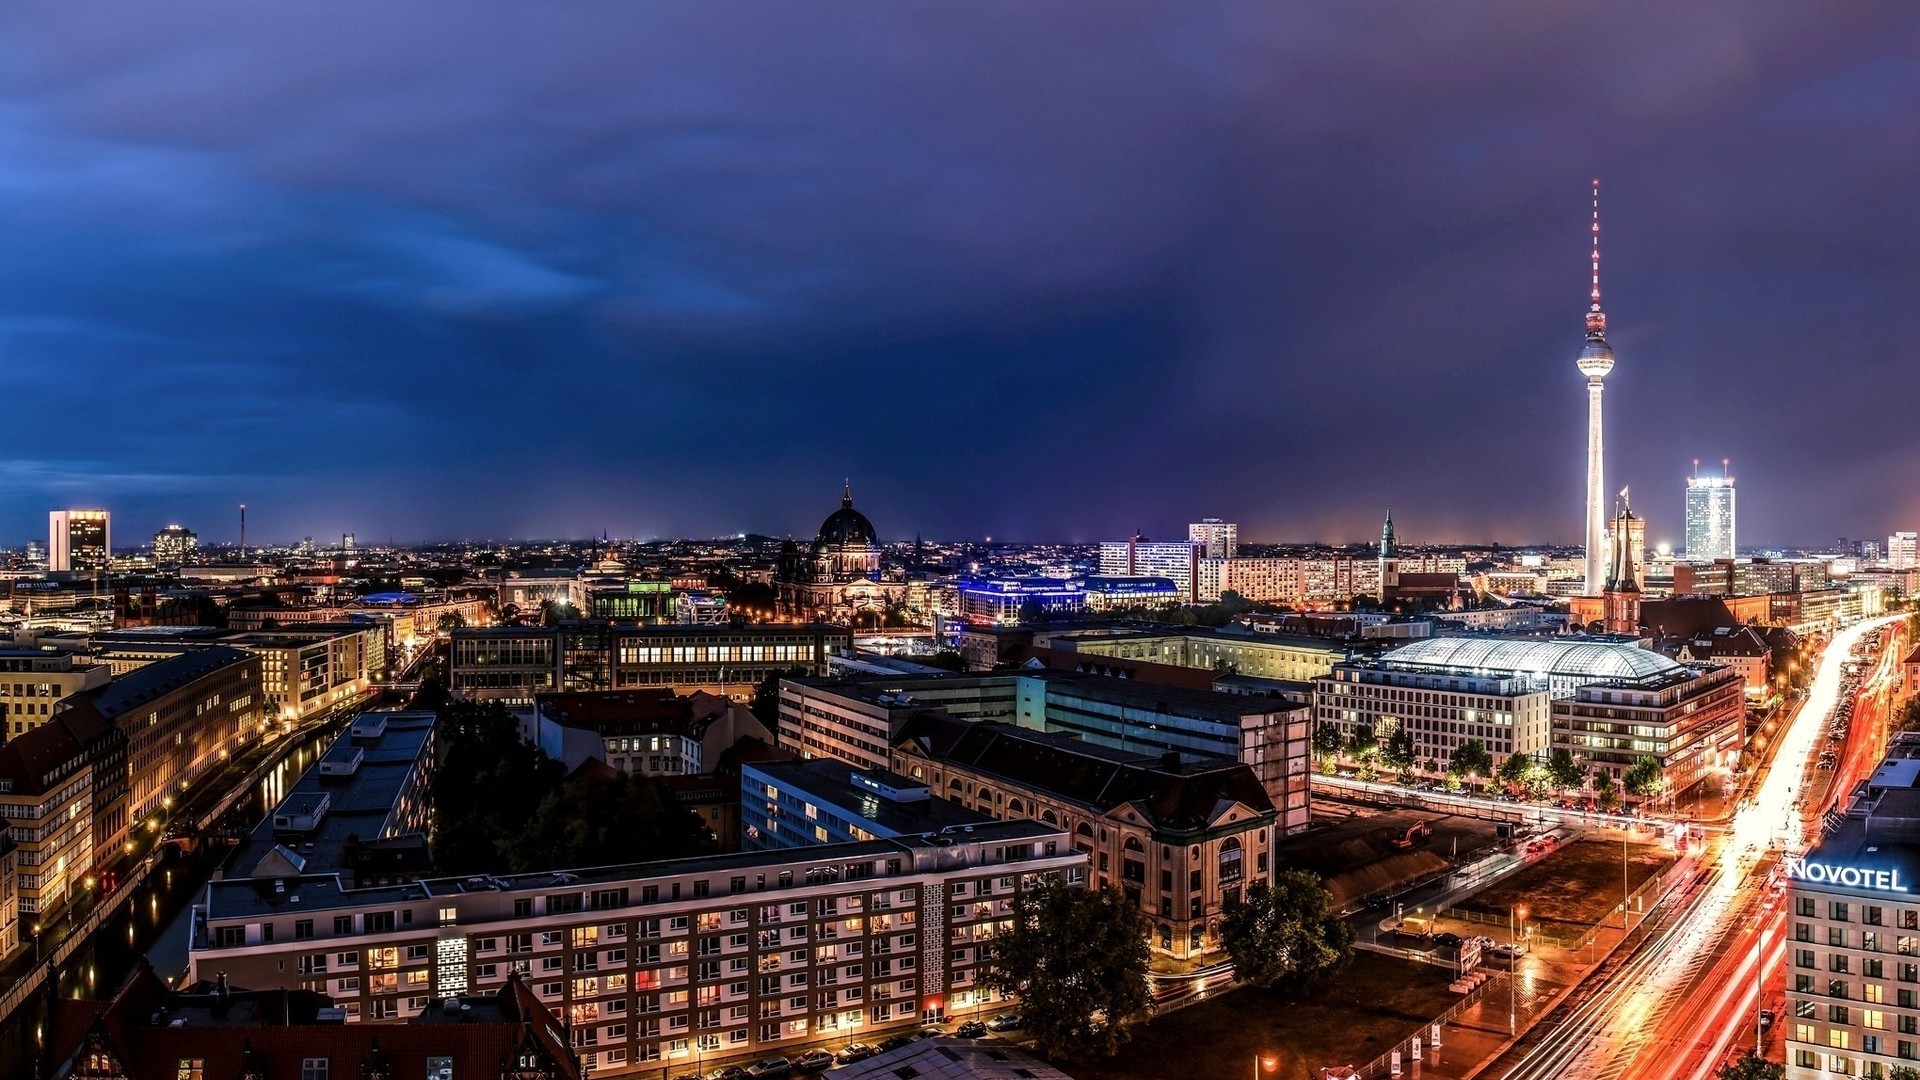 architecture, Building, Cityscape, City, Capital, Long exposure, Berlin, Germany, Street, Lights, Light trails, Modern, Tower, Antenna, Cathedral, Clouds, Night, Urban, Trees Wallpaper